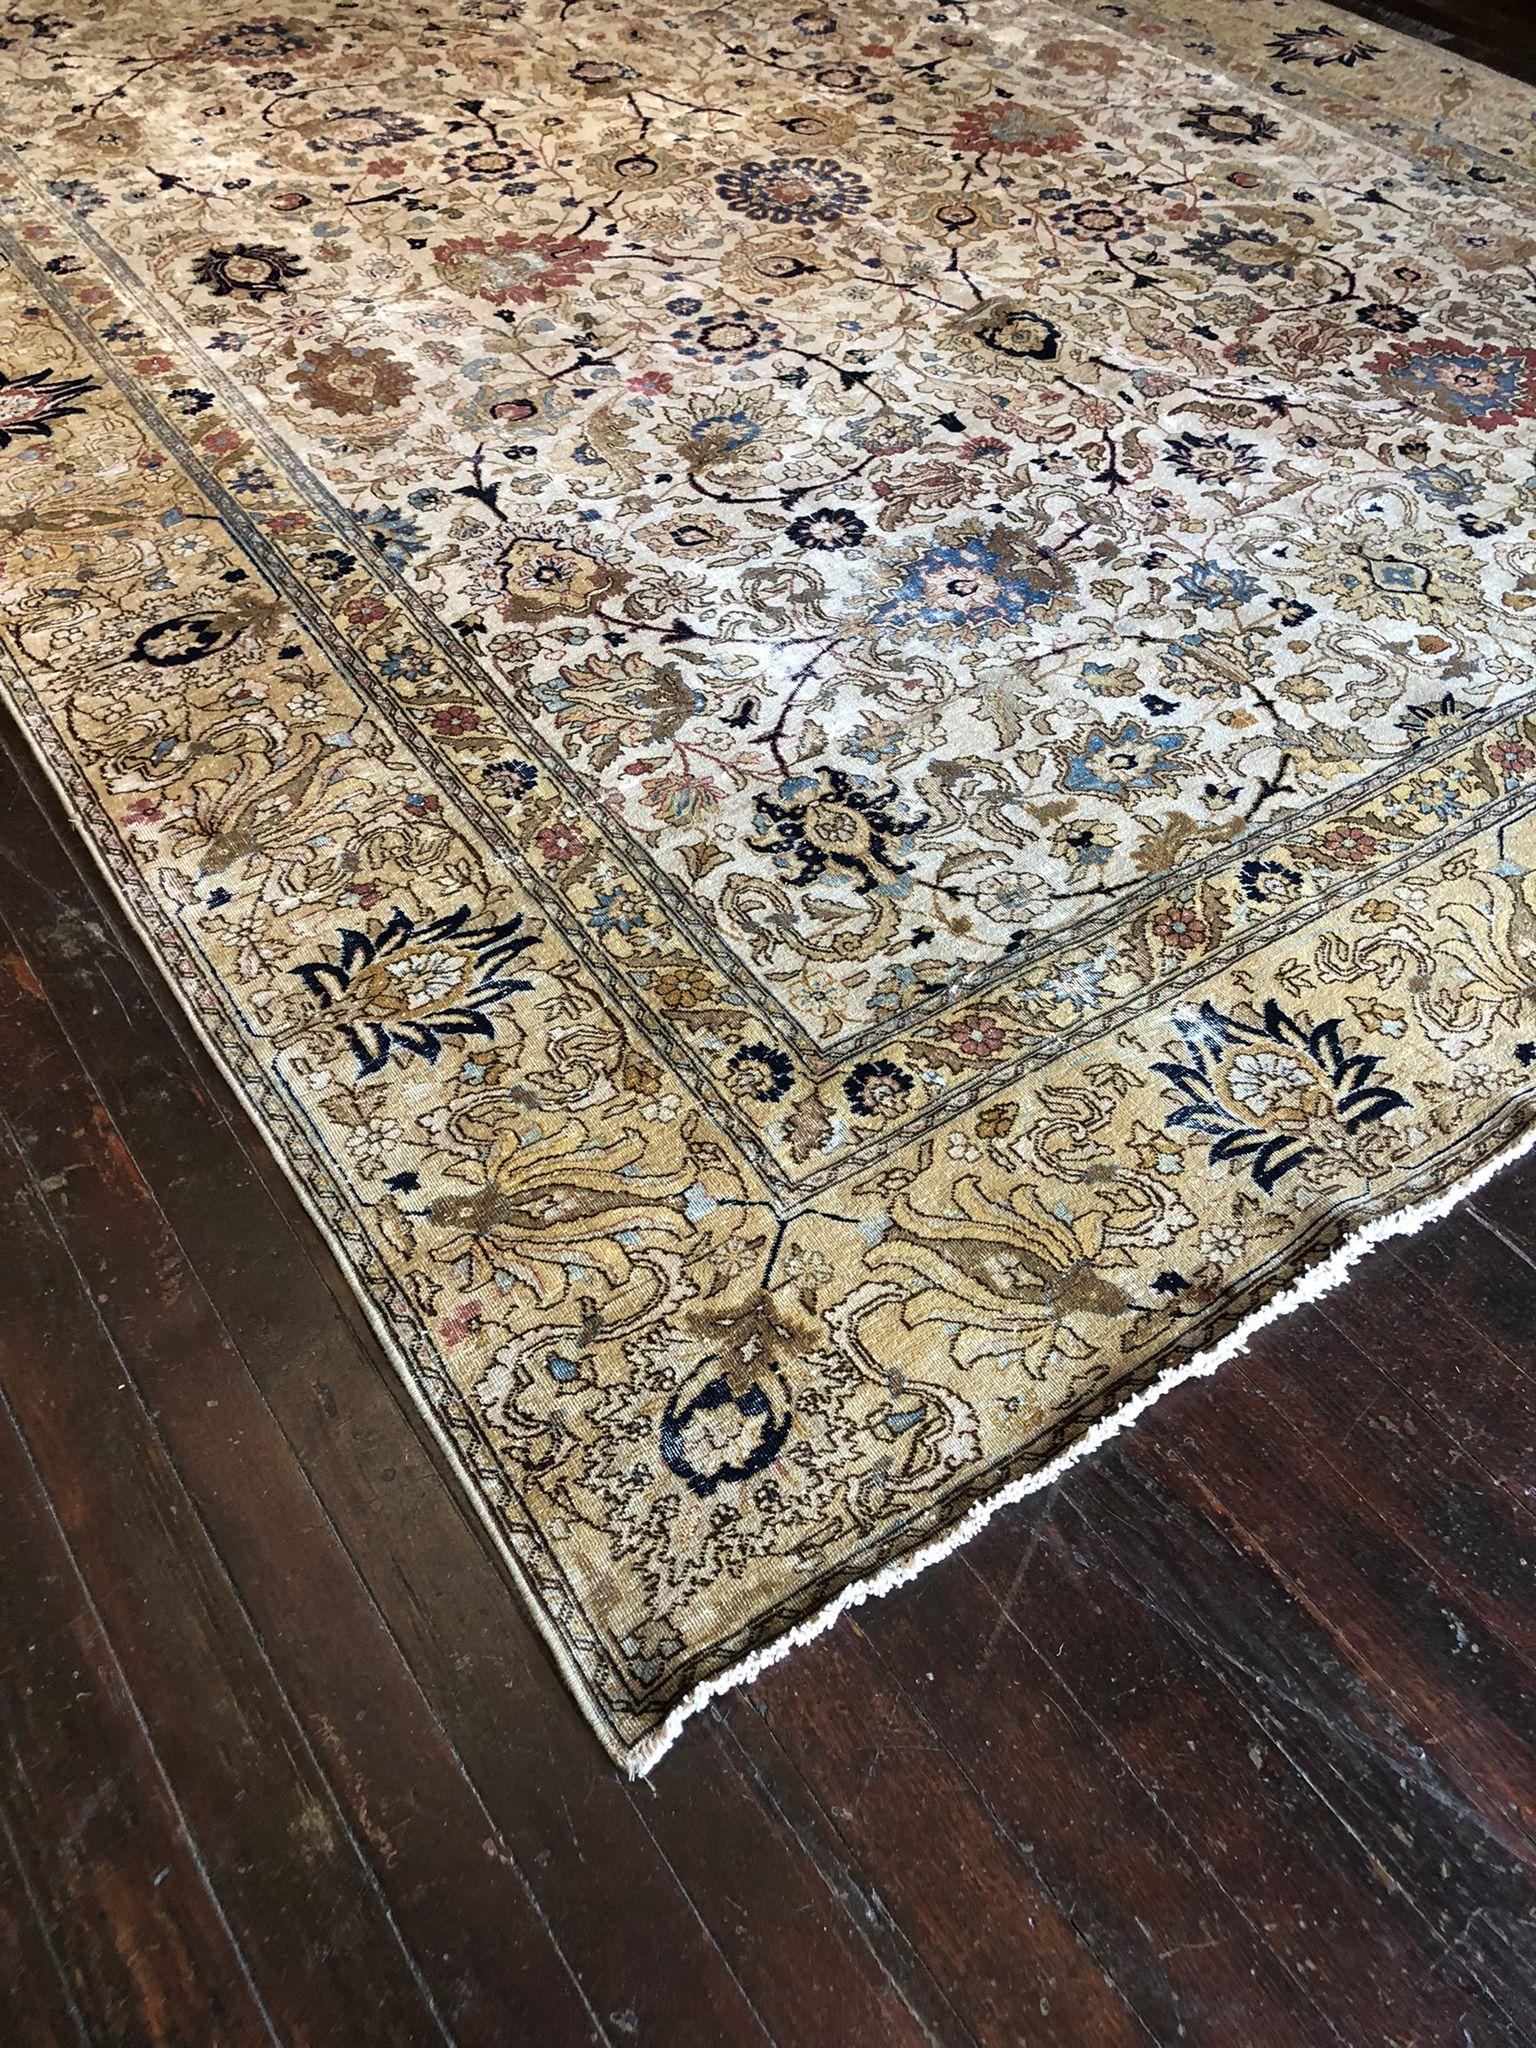 A Vintage Tabriz Rug is a testament to the timeless beauty and craftsmanship of Persian rug-making, known for its intricate designs and rich color palettes. This particular rug, with dimensions of 8 feet 8 inches by 11 feet 9 inches, is a classic